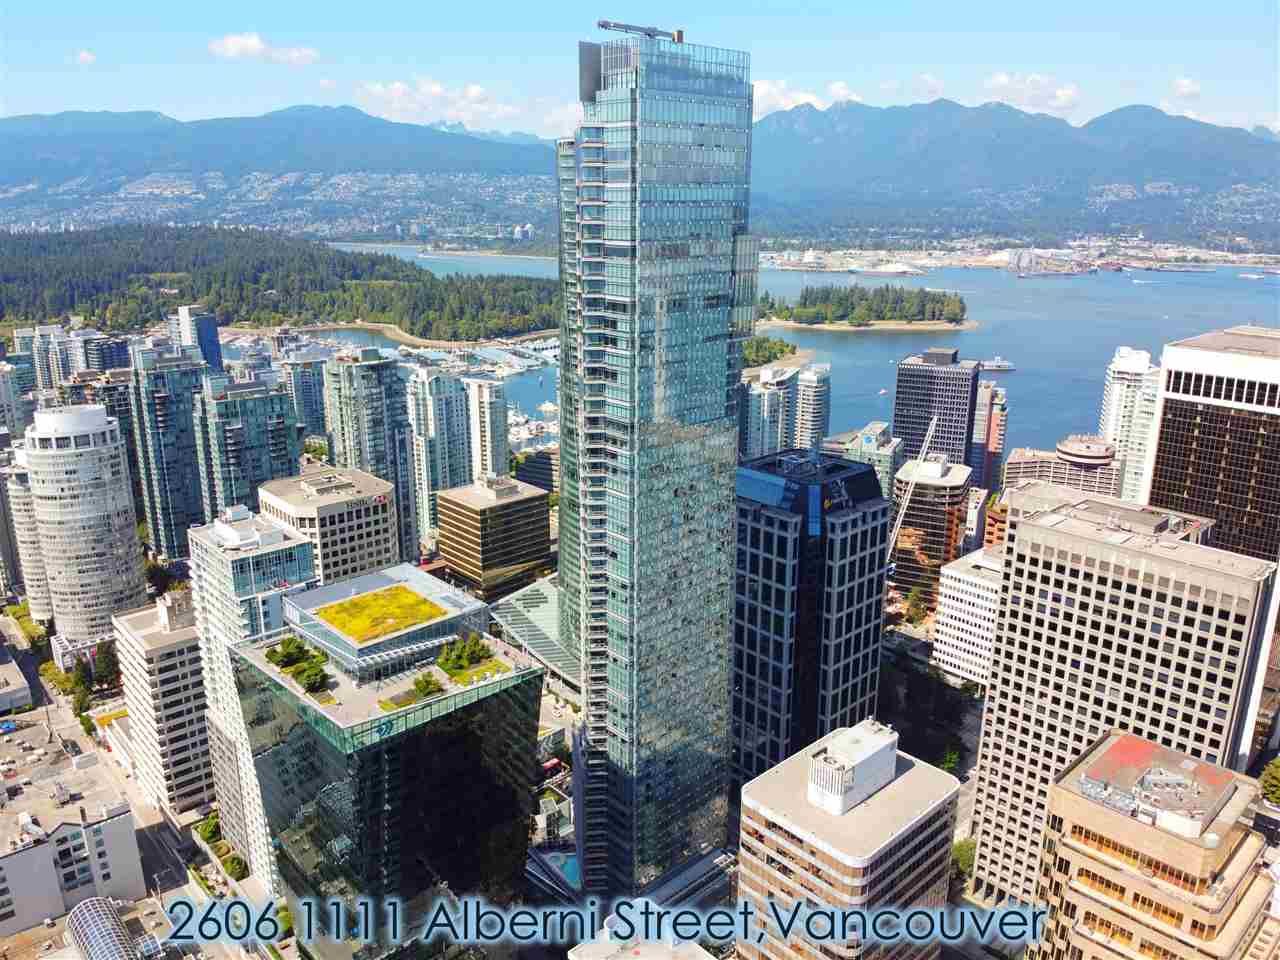 I have sold a property at 2606 1111 ALBERNI ST in Vancouver
